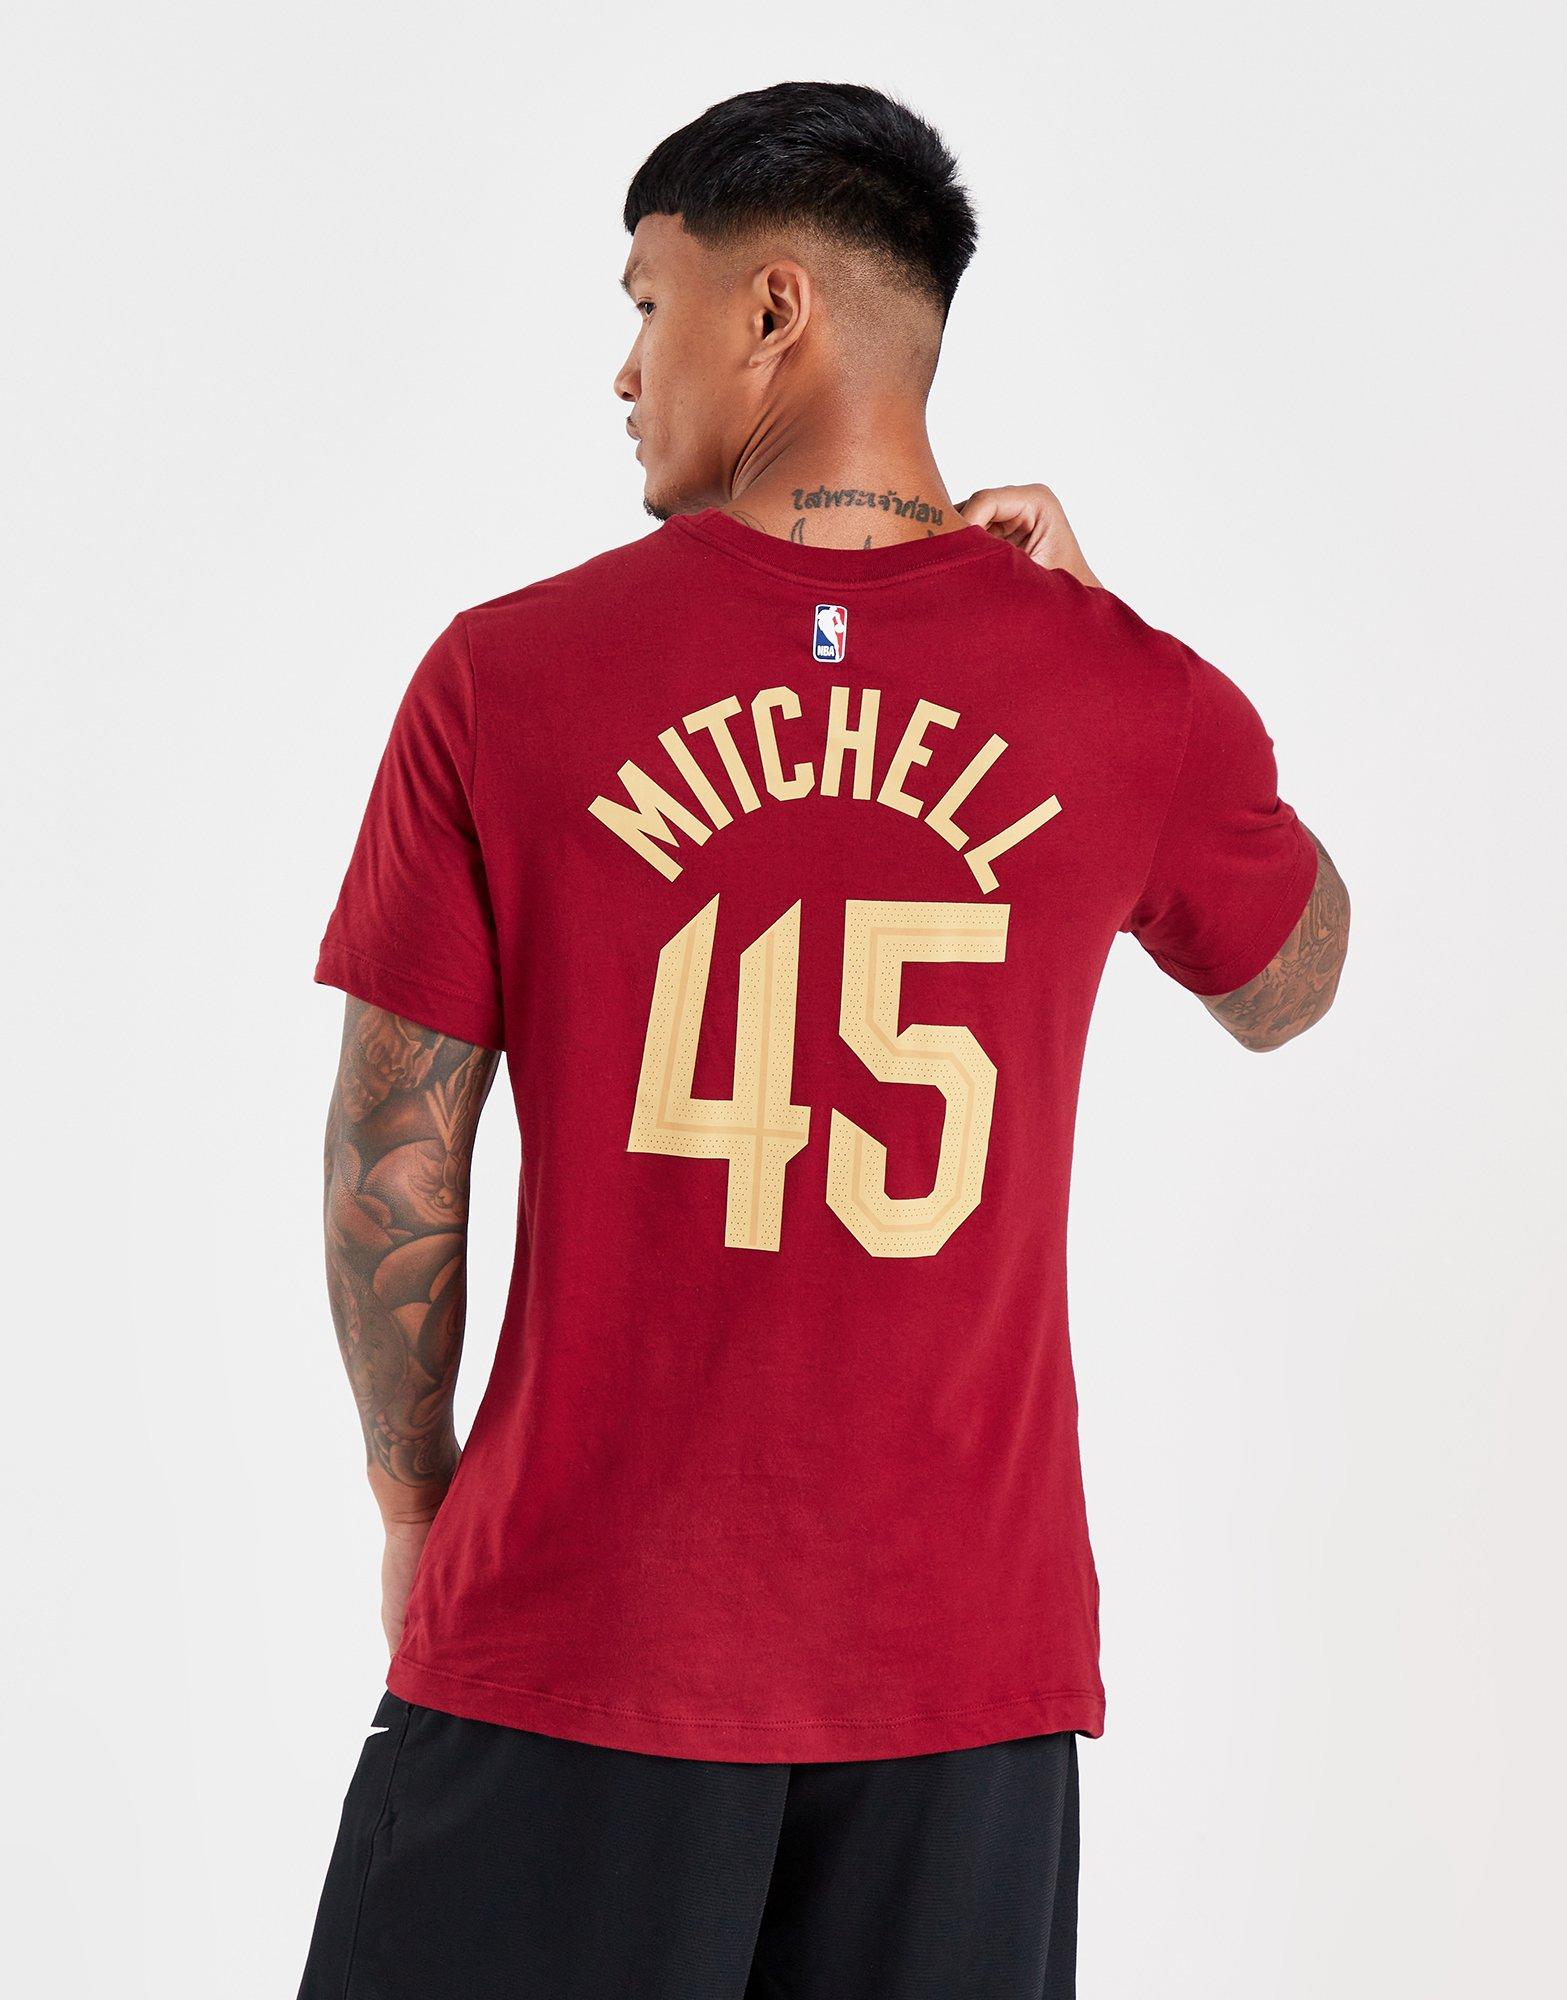 Red Nike NBA Cleveland Cavaliers Mitchell #45 T-Shirt